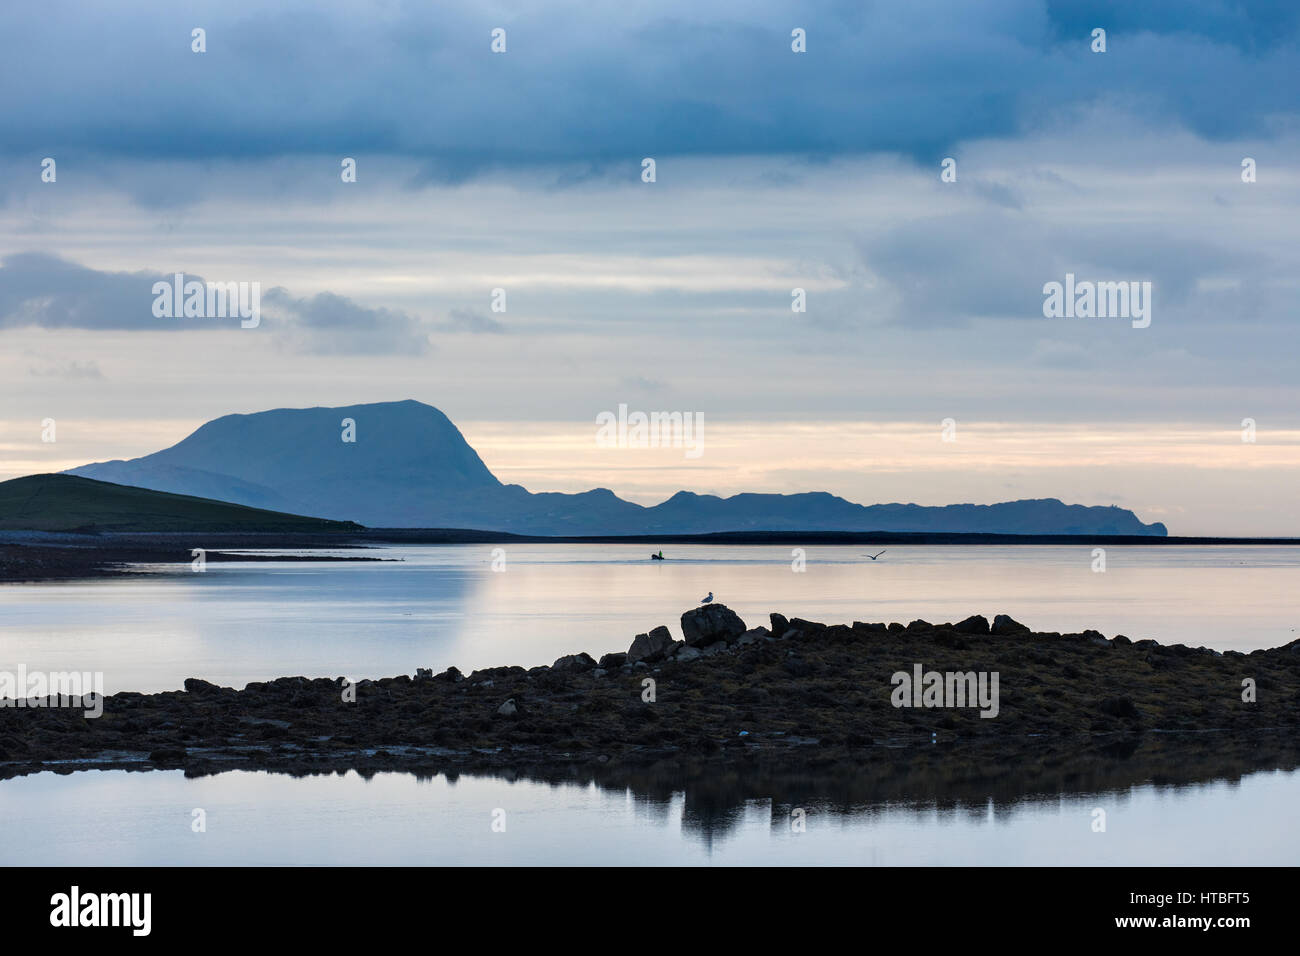 A solitary boat off Clare Island, Clew Bay, Co Mayo, Ireland Stock Photo